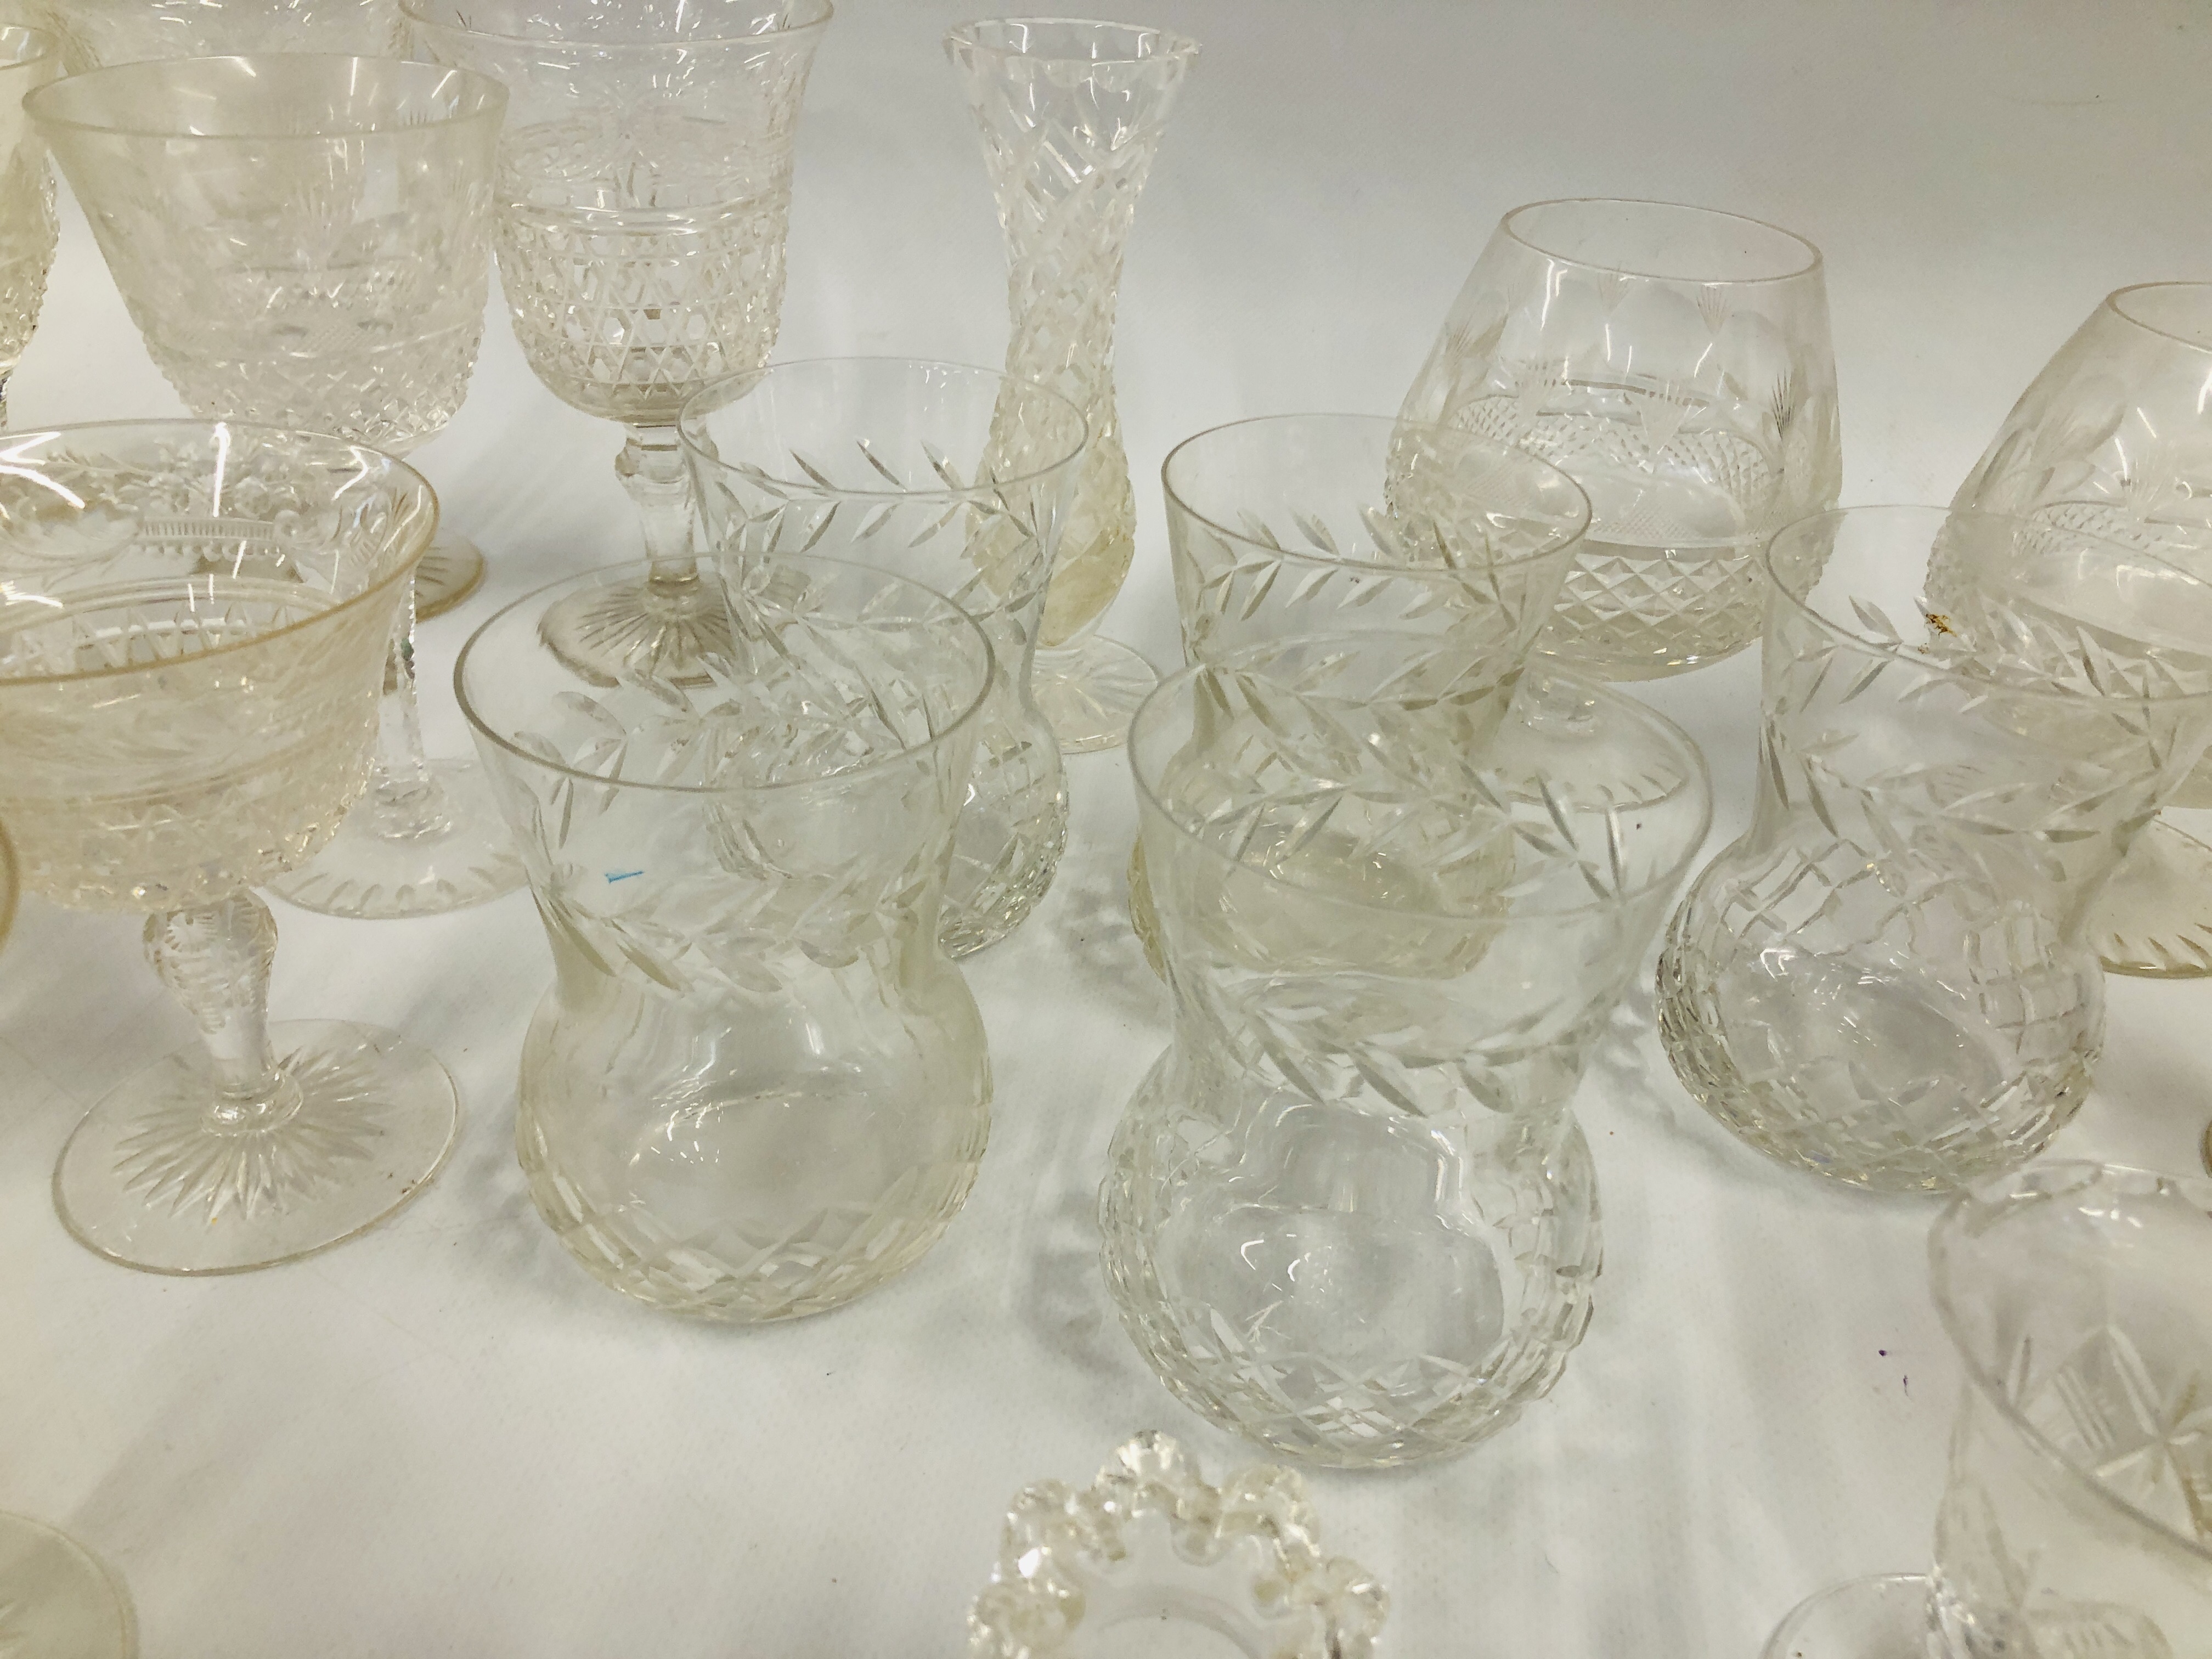 COLLECTION OF GOOD QUALITY ART GLASS CRYSTAL DRINKING GLASSES, VASE, BRANDY GLASSES, ETC. - Image 4 of 6